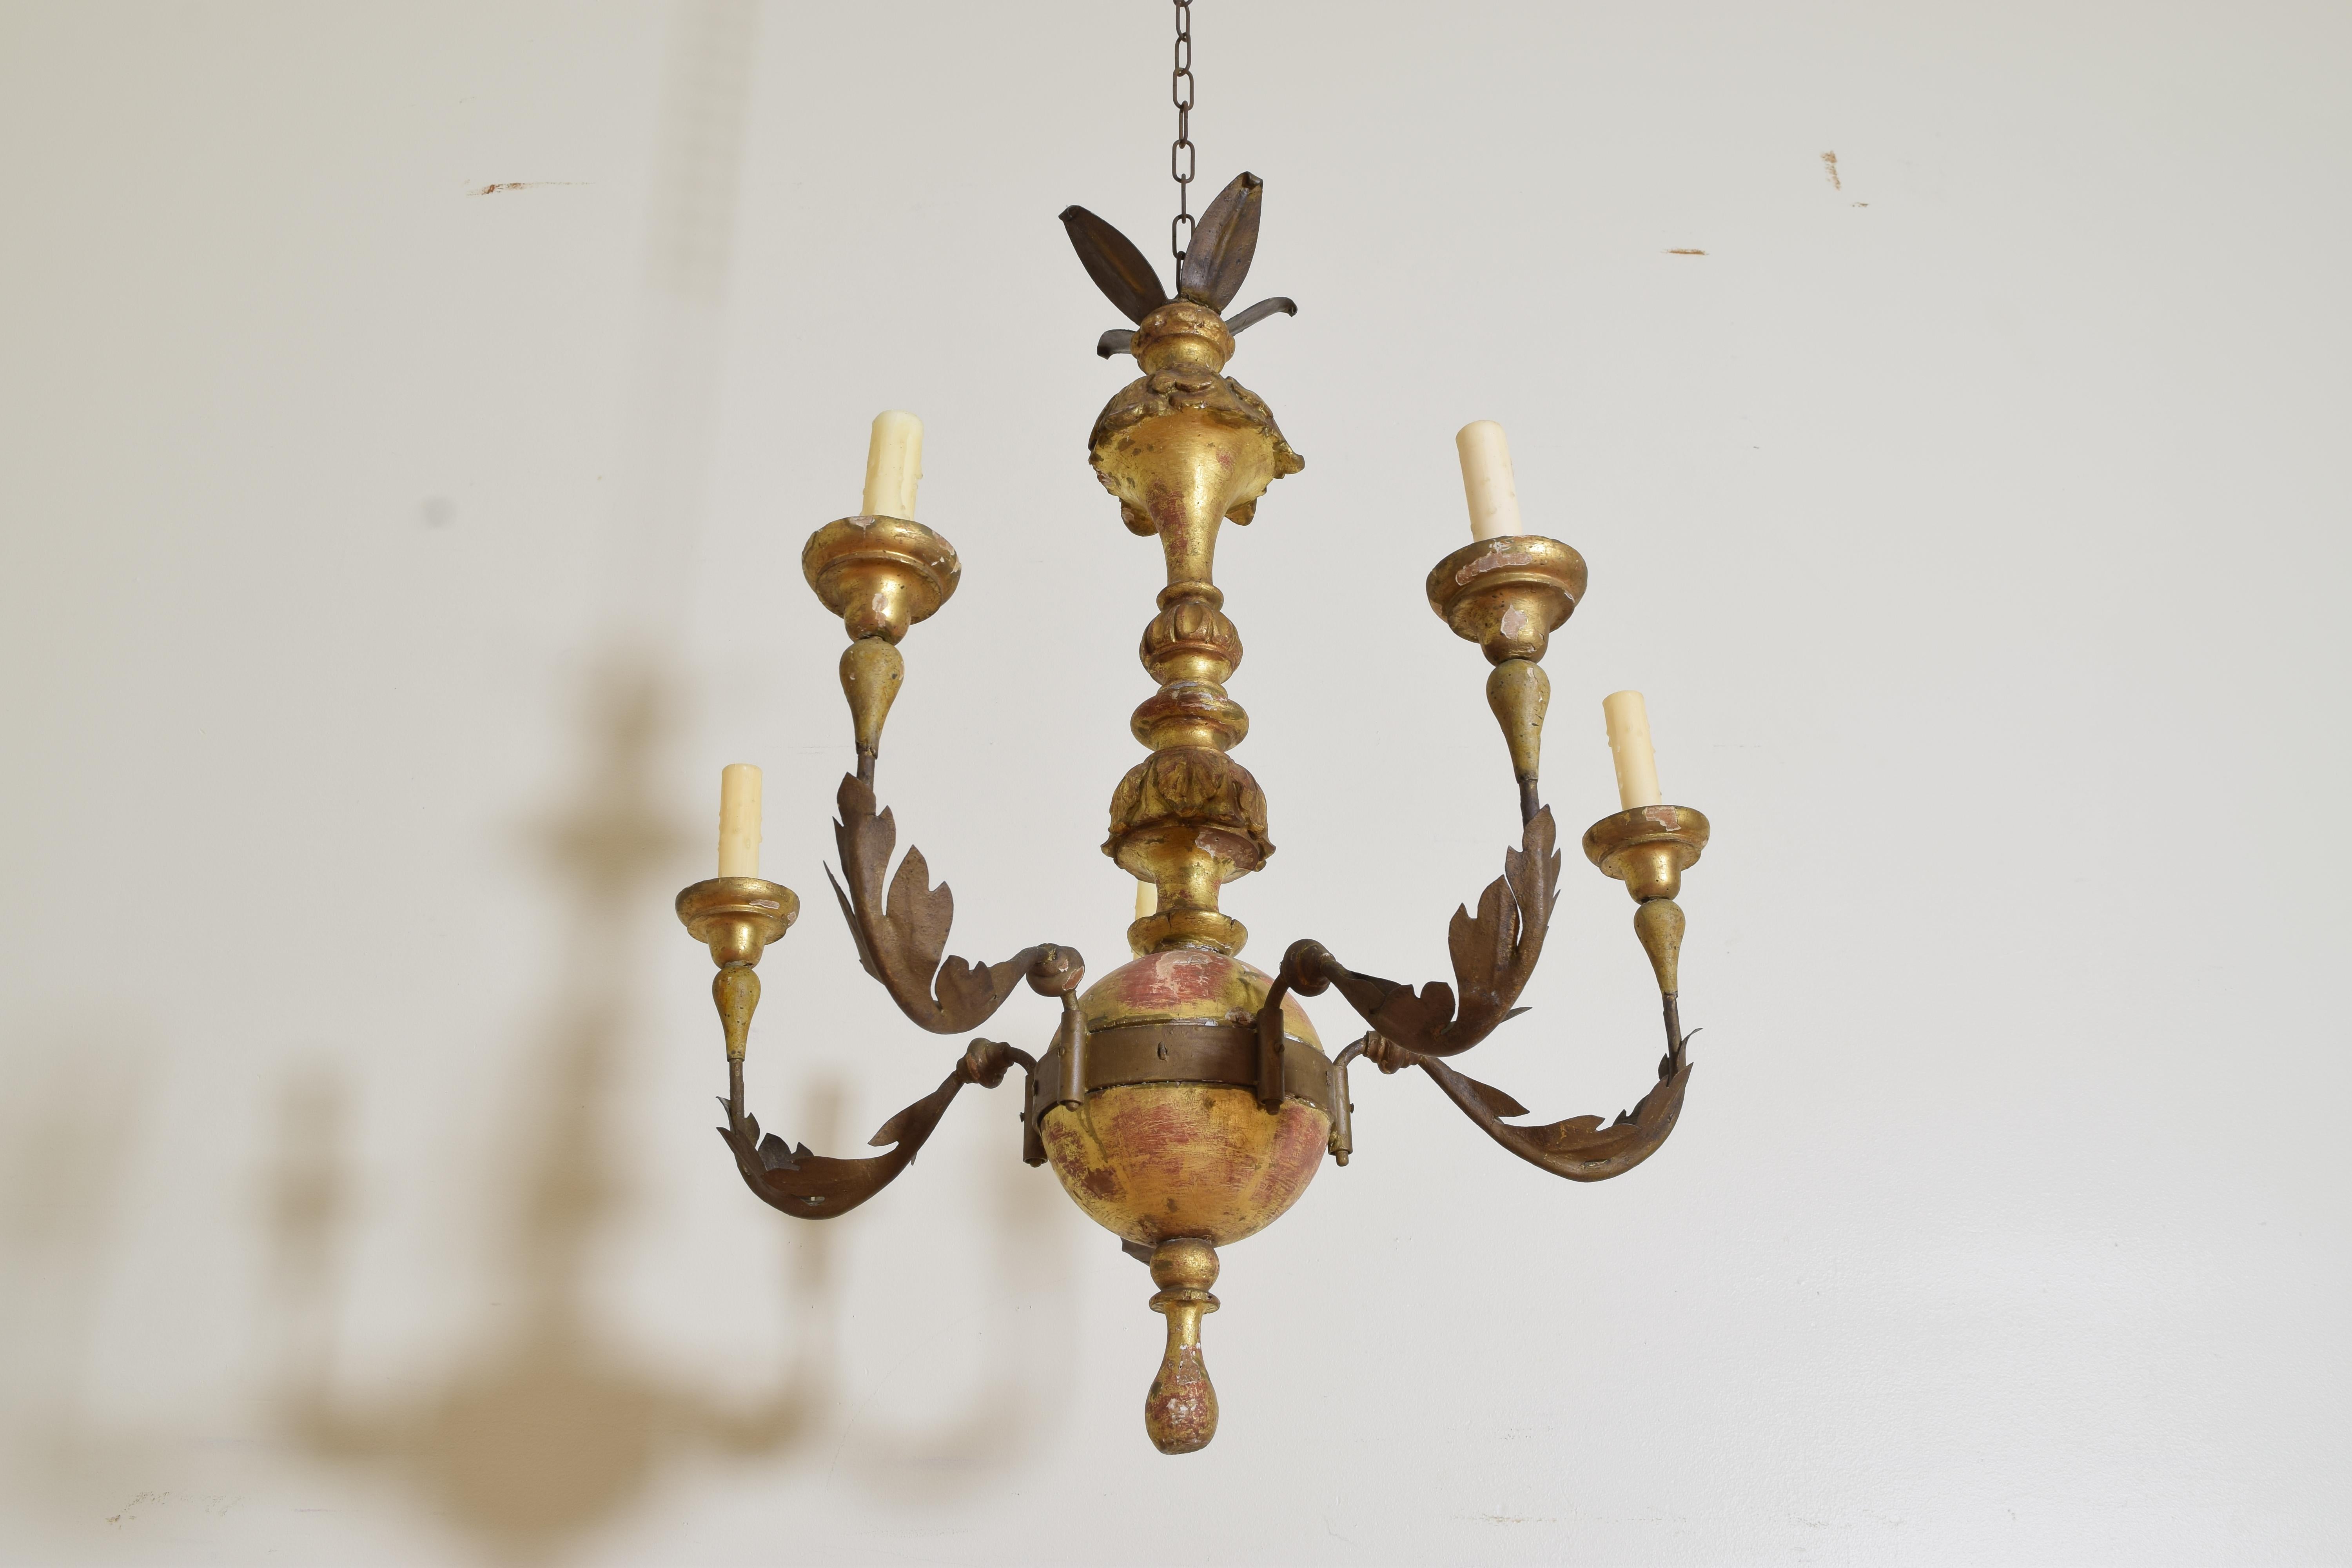 Mid-19th Century Italian Neoclassical Revival Period Giltwood & Iron 5-Light Chandelier, 3q 19thC